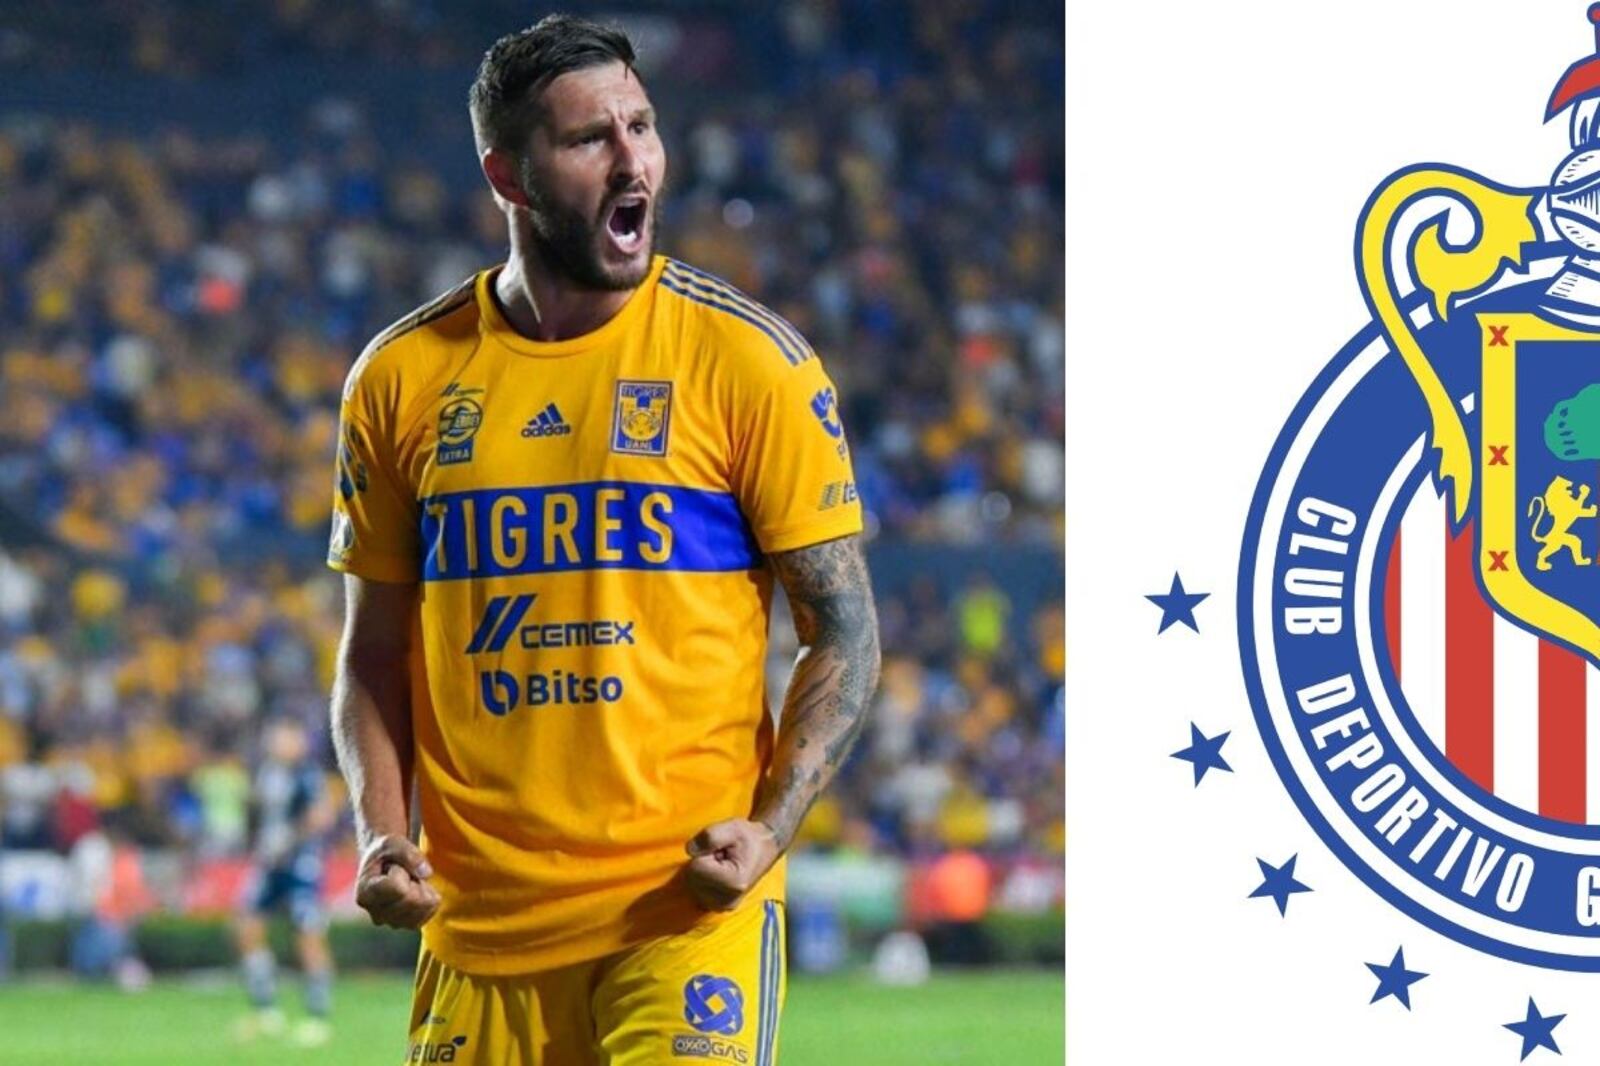 After his mistakes against Chivas, Gignac's decision to continue in Mexico